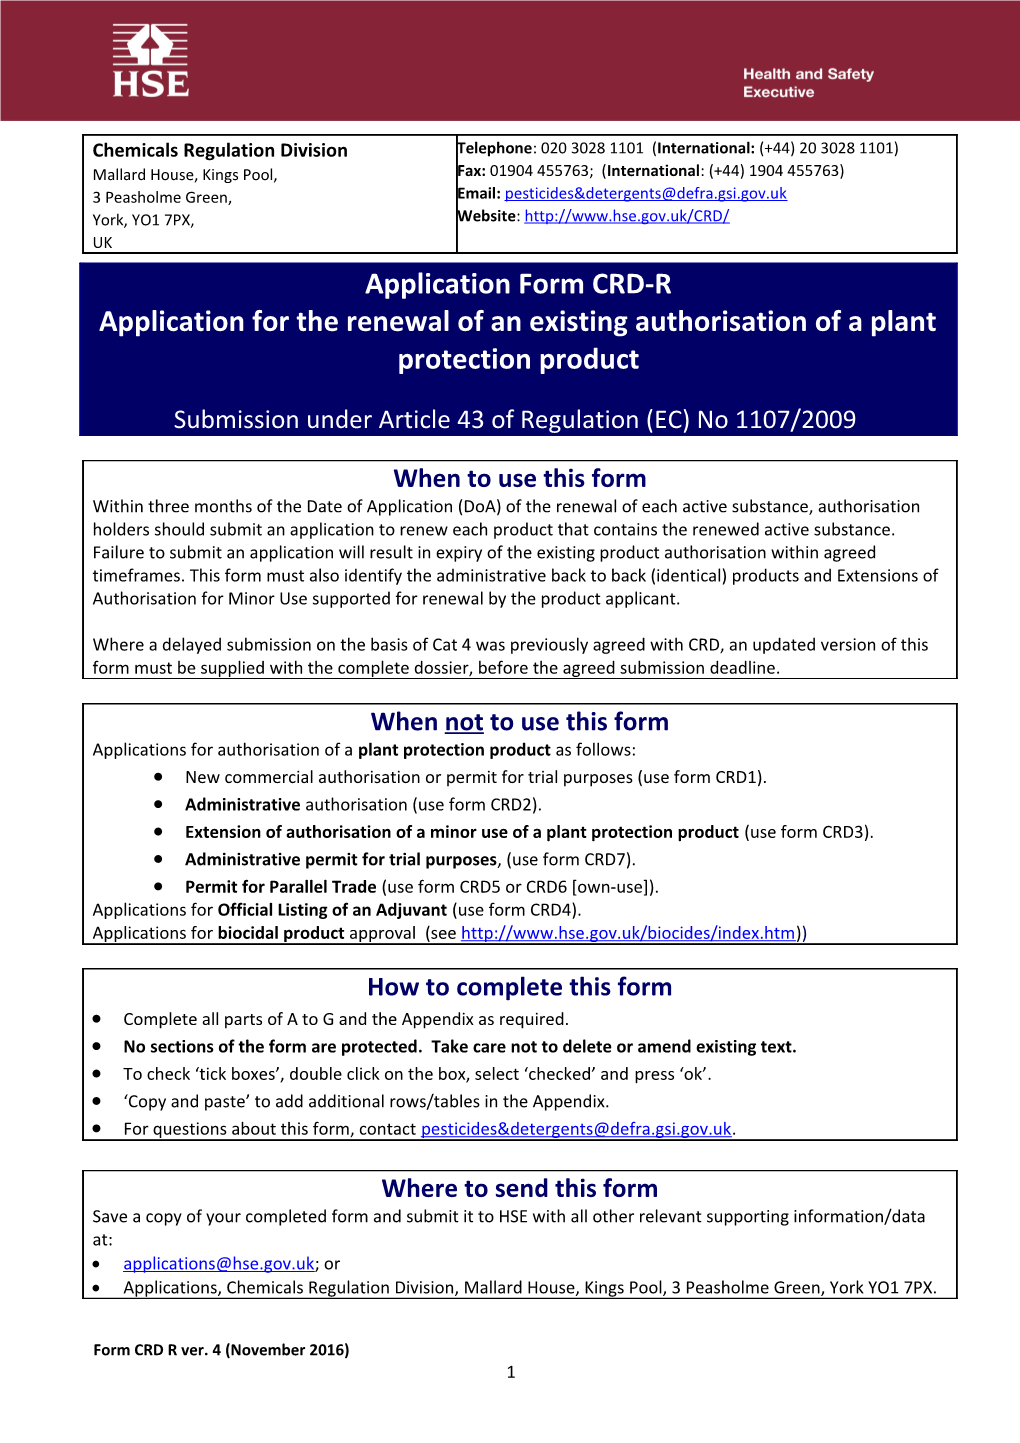 New Commercial Authorisation Or Permit for Trial Purposes (Use Form CRD1)